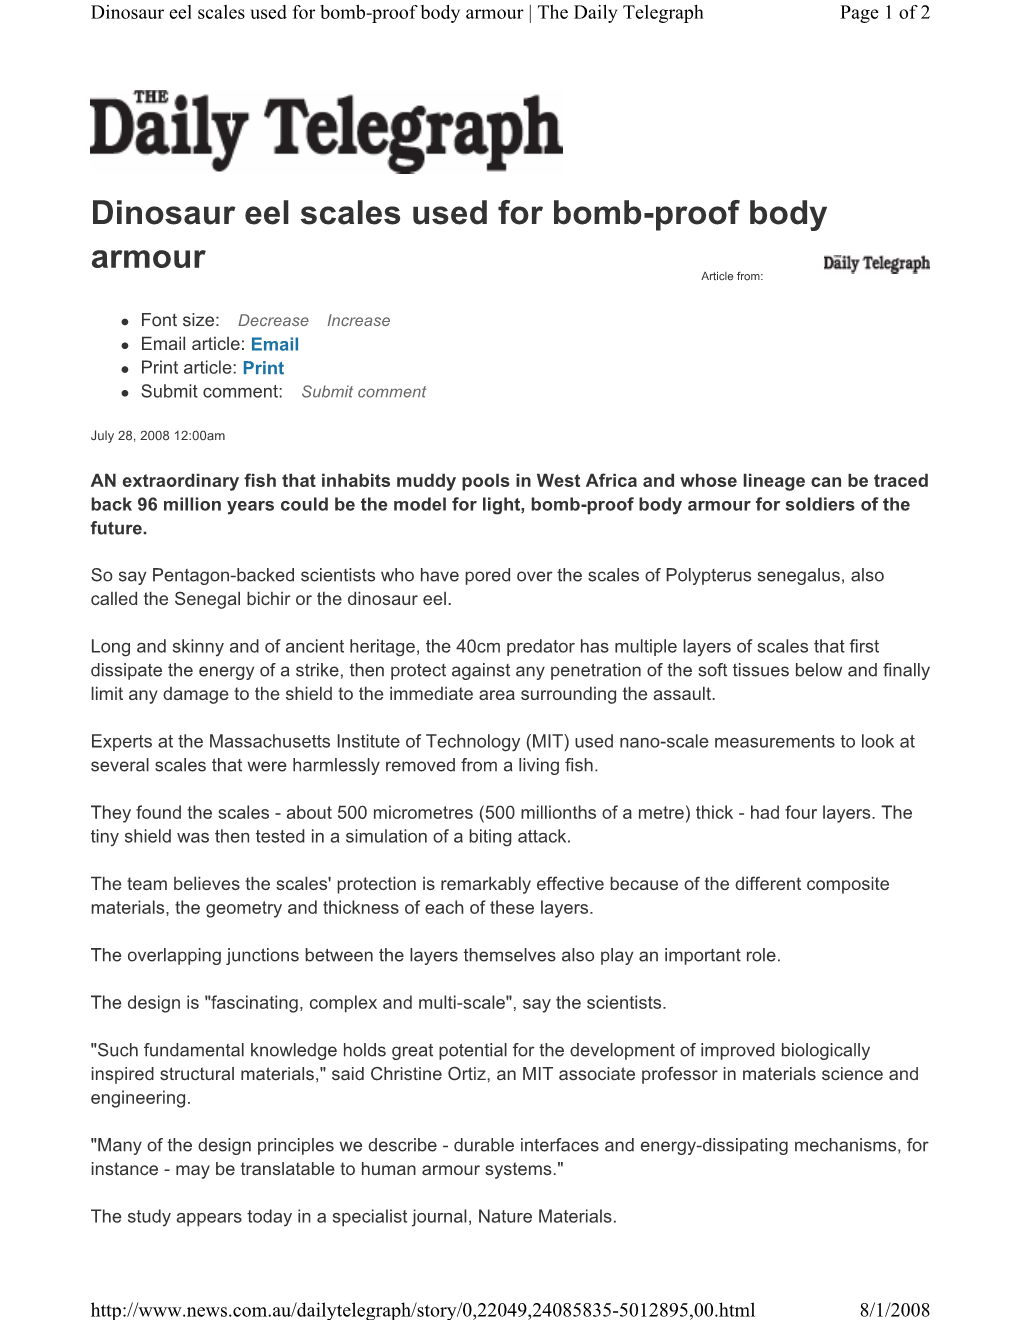 Dinosaur Eel Scales Used for Bomb-Proof Body Armour | the Daily Telegraph Page 1 of 2